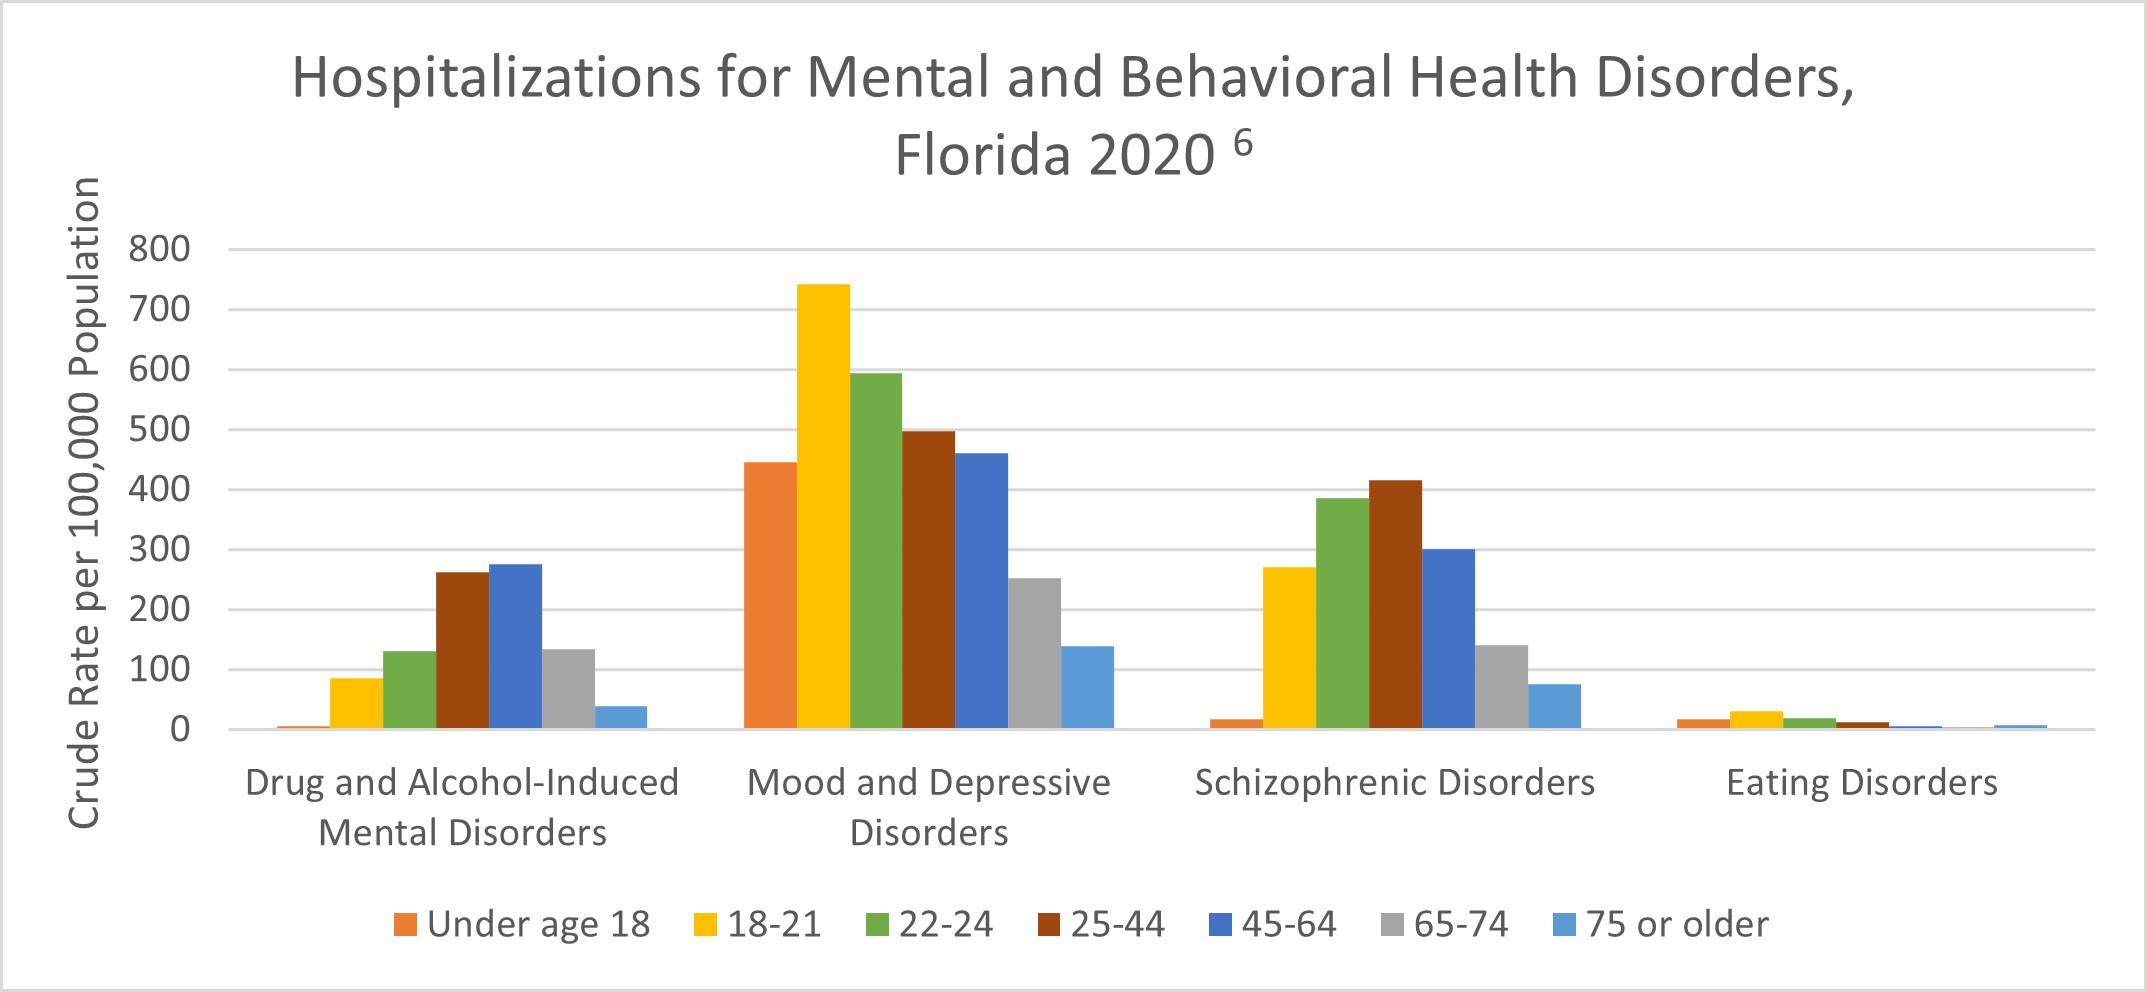 Hospitalizations for Mental and Behavioral Health Disorders, Florida 2020